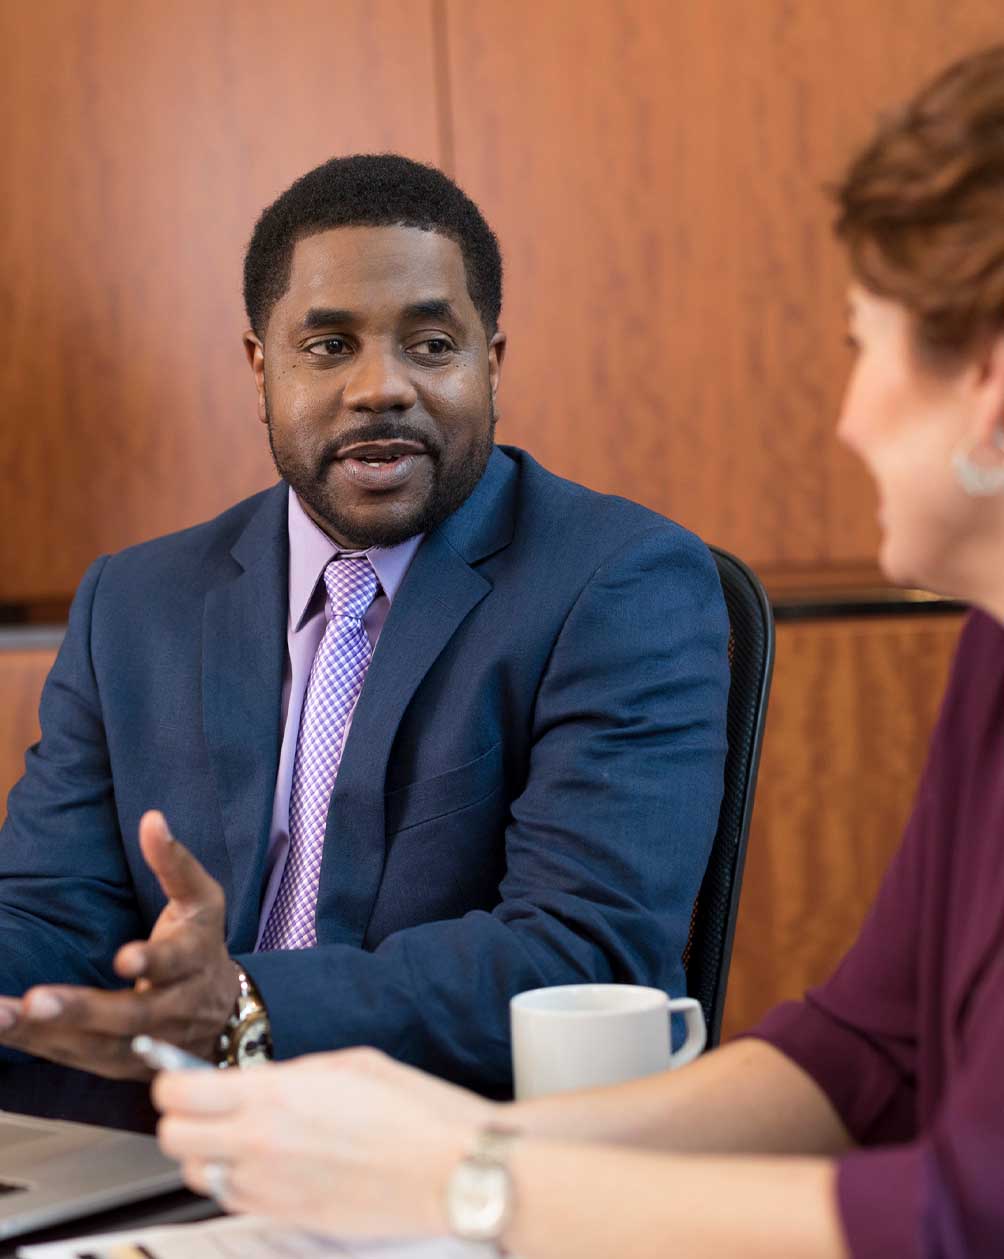 Black man in a suit talking with a colleague 